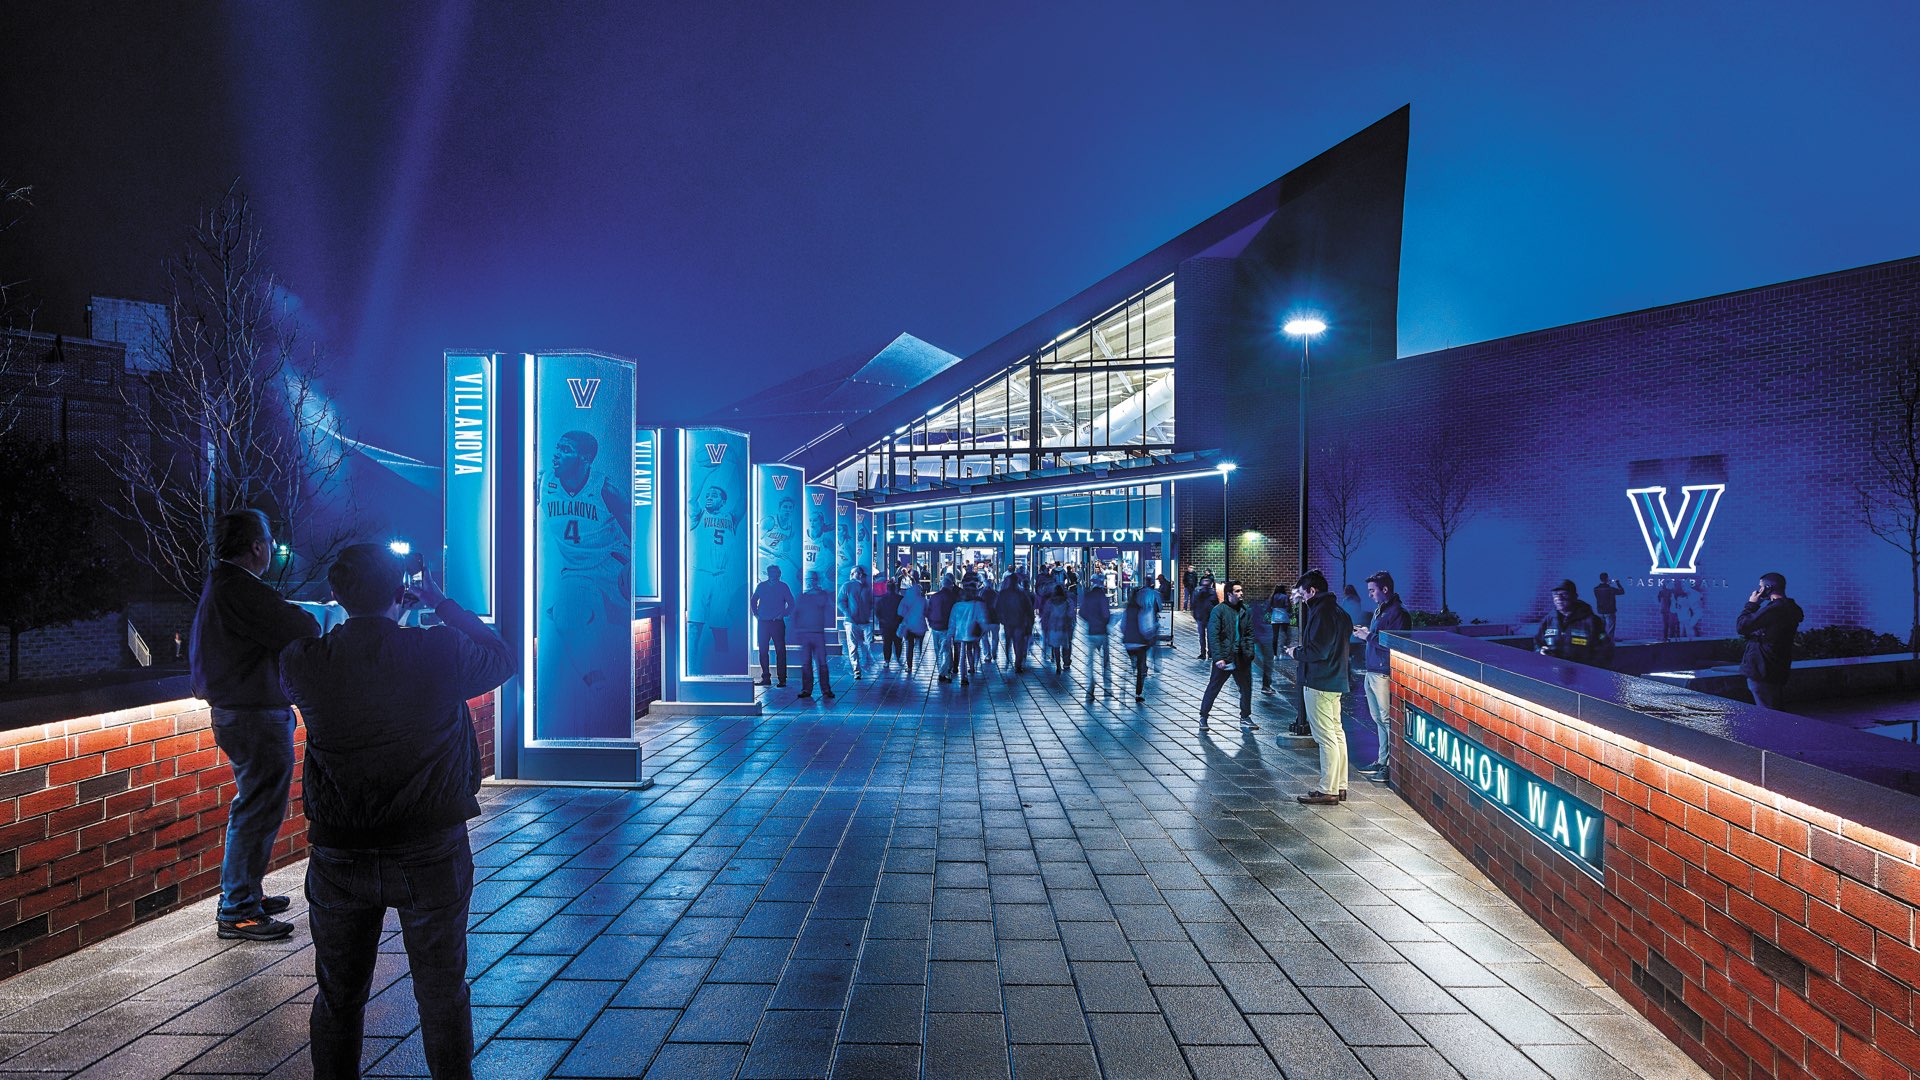 The new Finneran Pavilion at nighttime, with crowds of people entering for a game